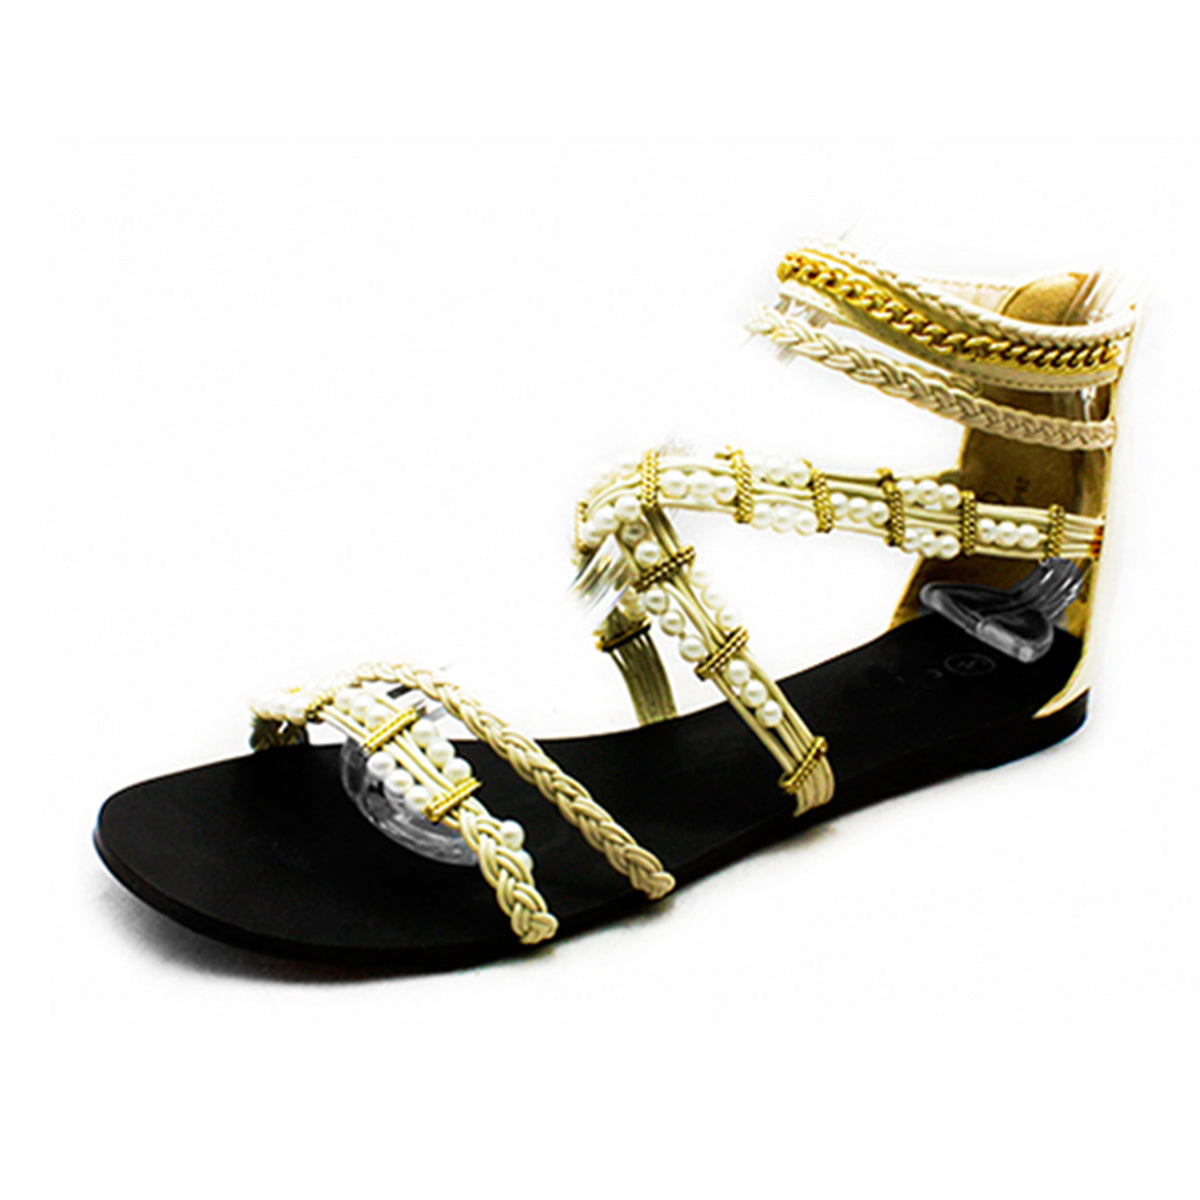 Ladies beige flat strappy sandals with beaded pearl detail